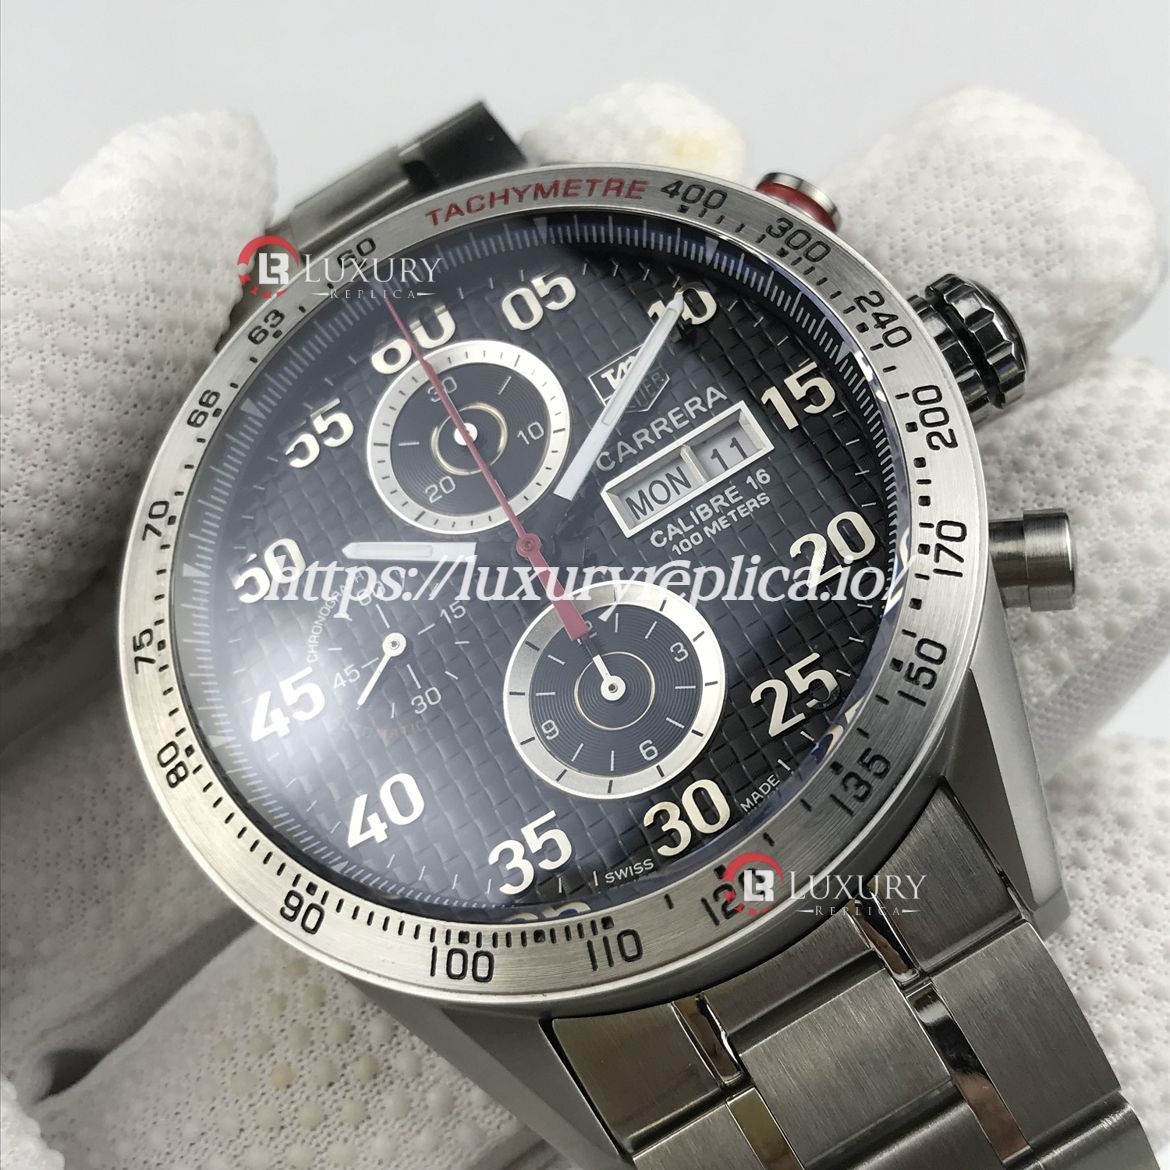 TAG HEUER CALIBRE 16 DAY DATE CHRONOGRAPH SWISS AUTOMATIC - BLACK CARBON FIBER DIAL - STAINLESS STEEL BRACELET